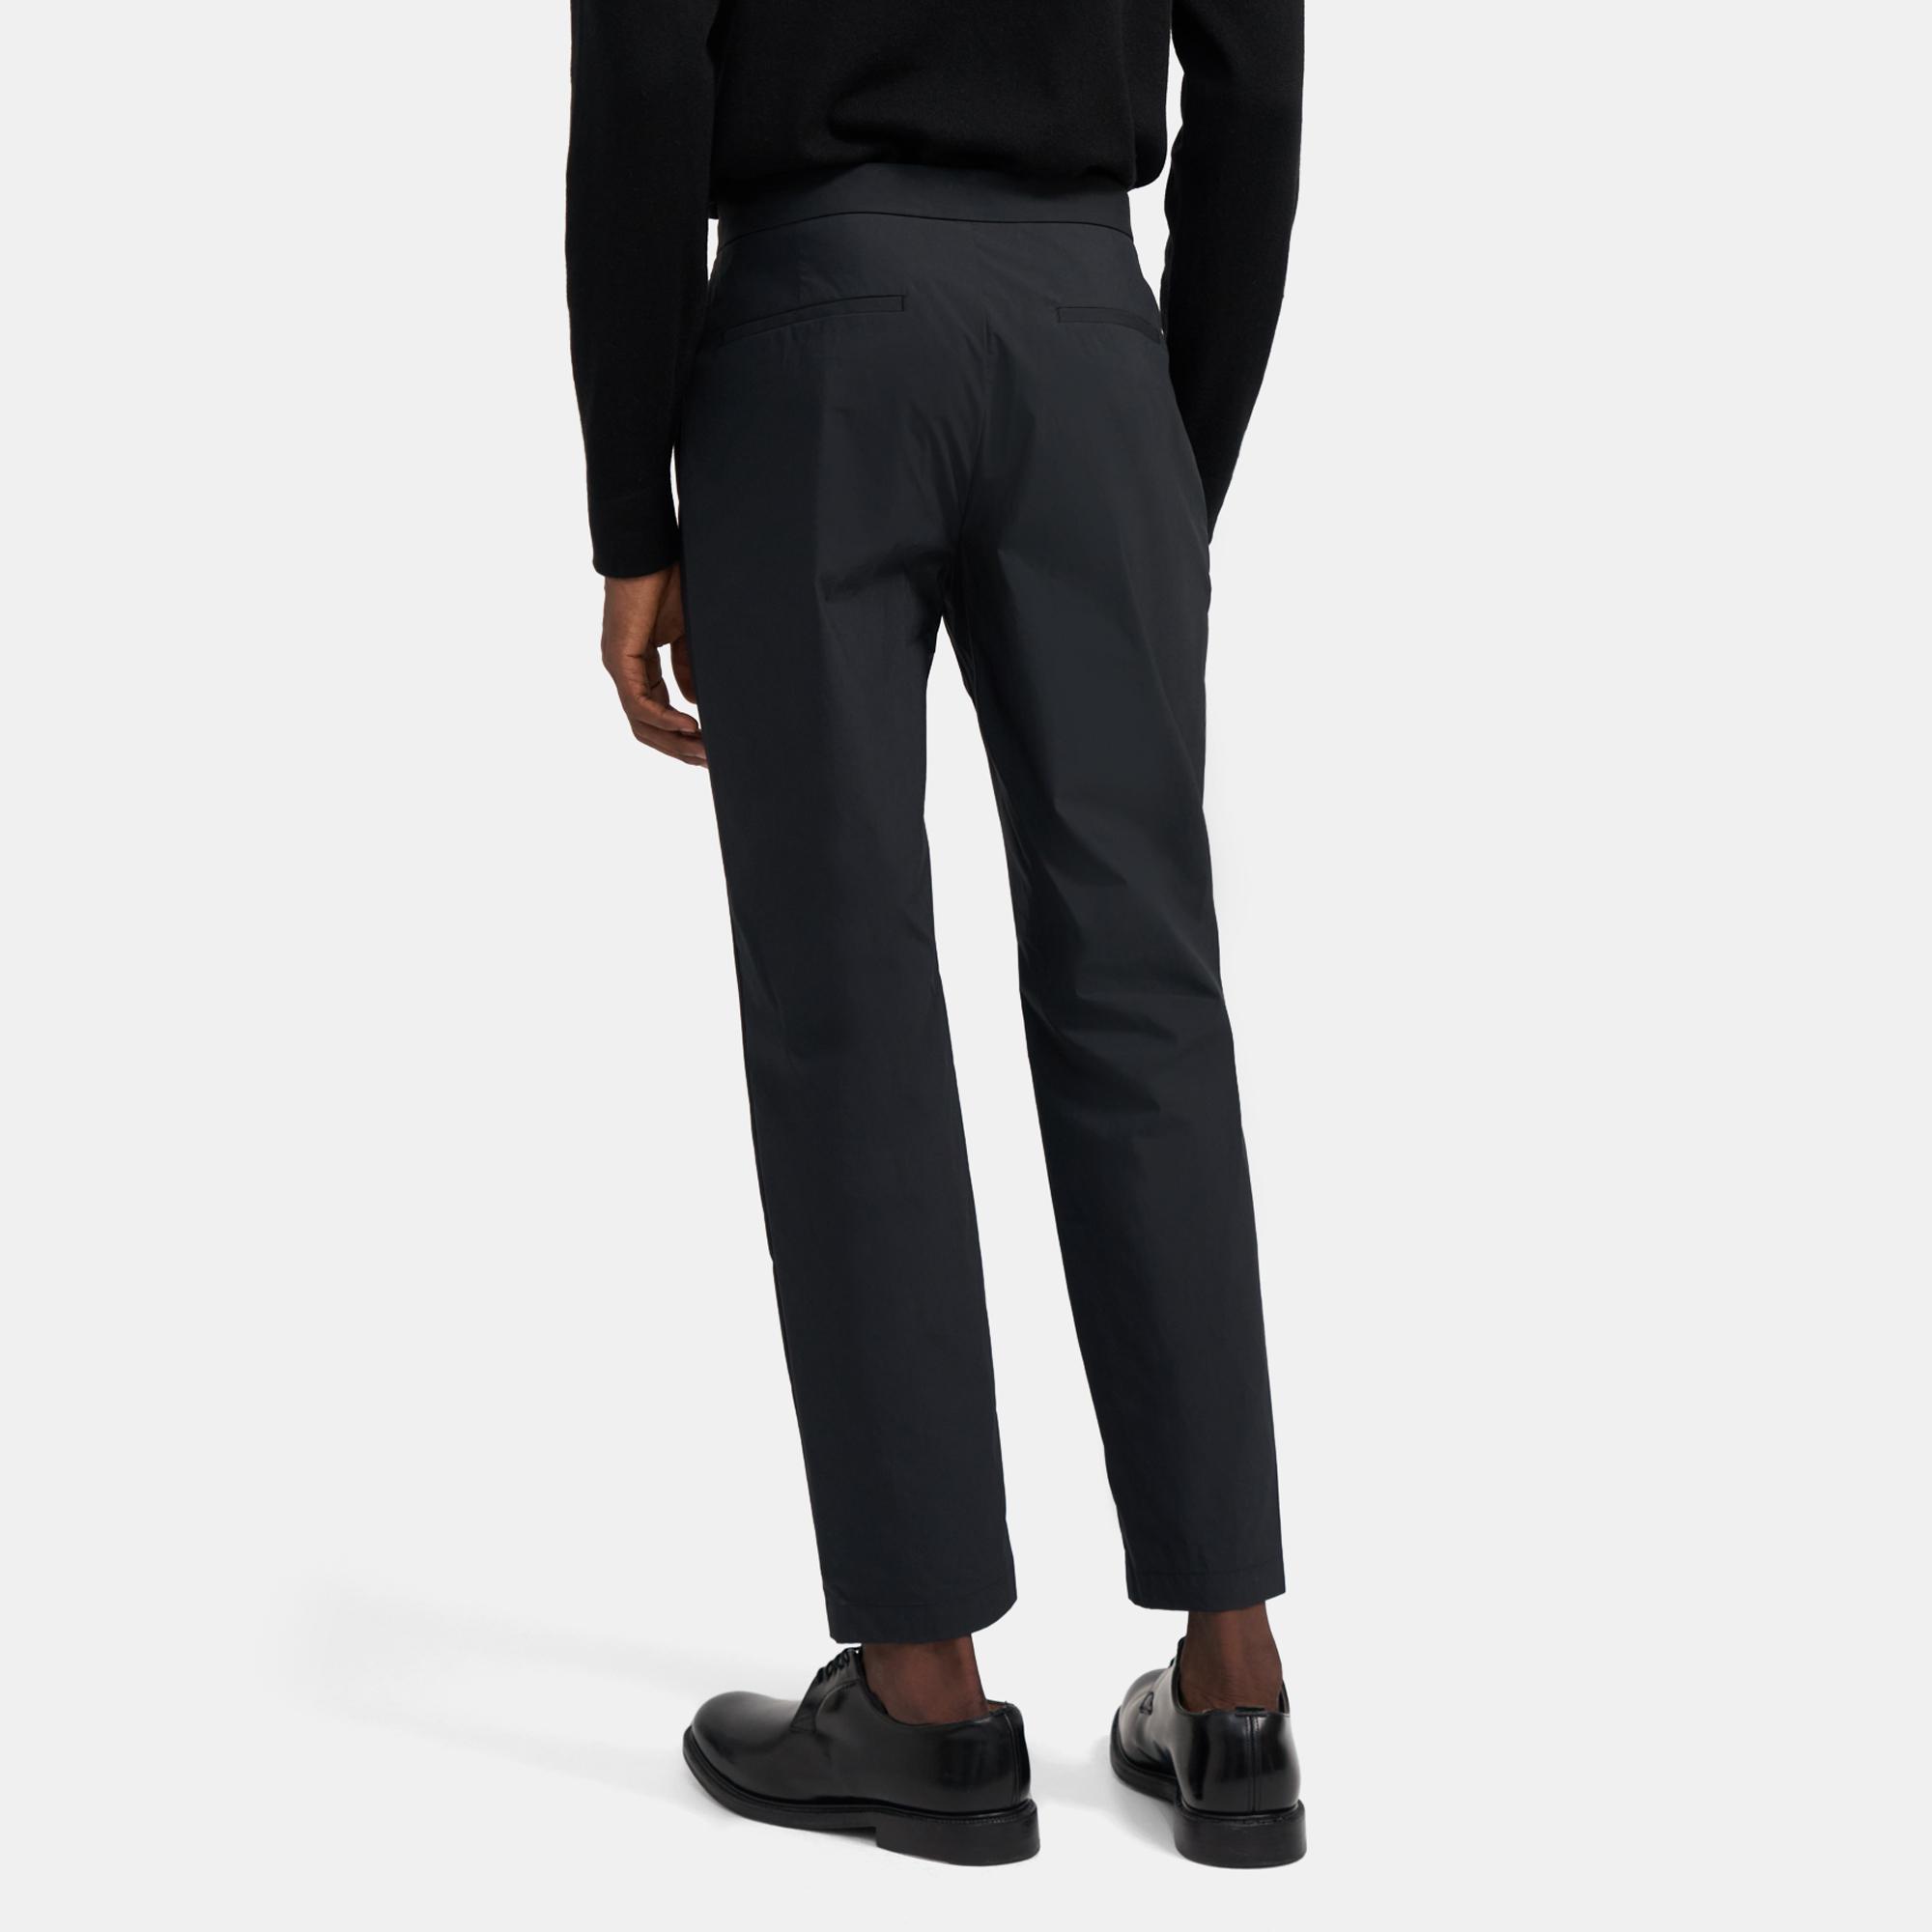 tapered formal pants